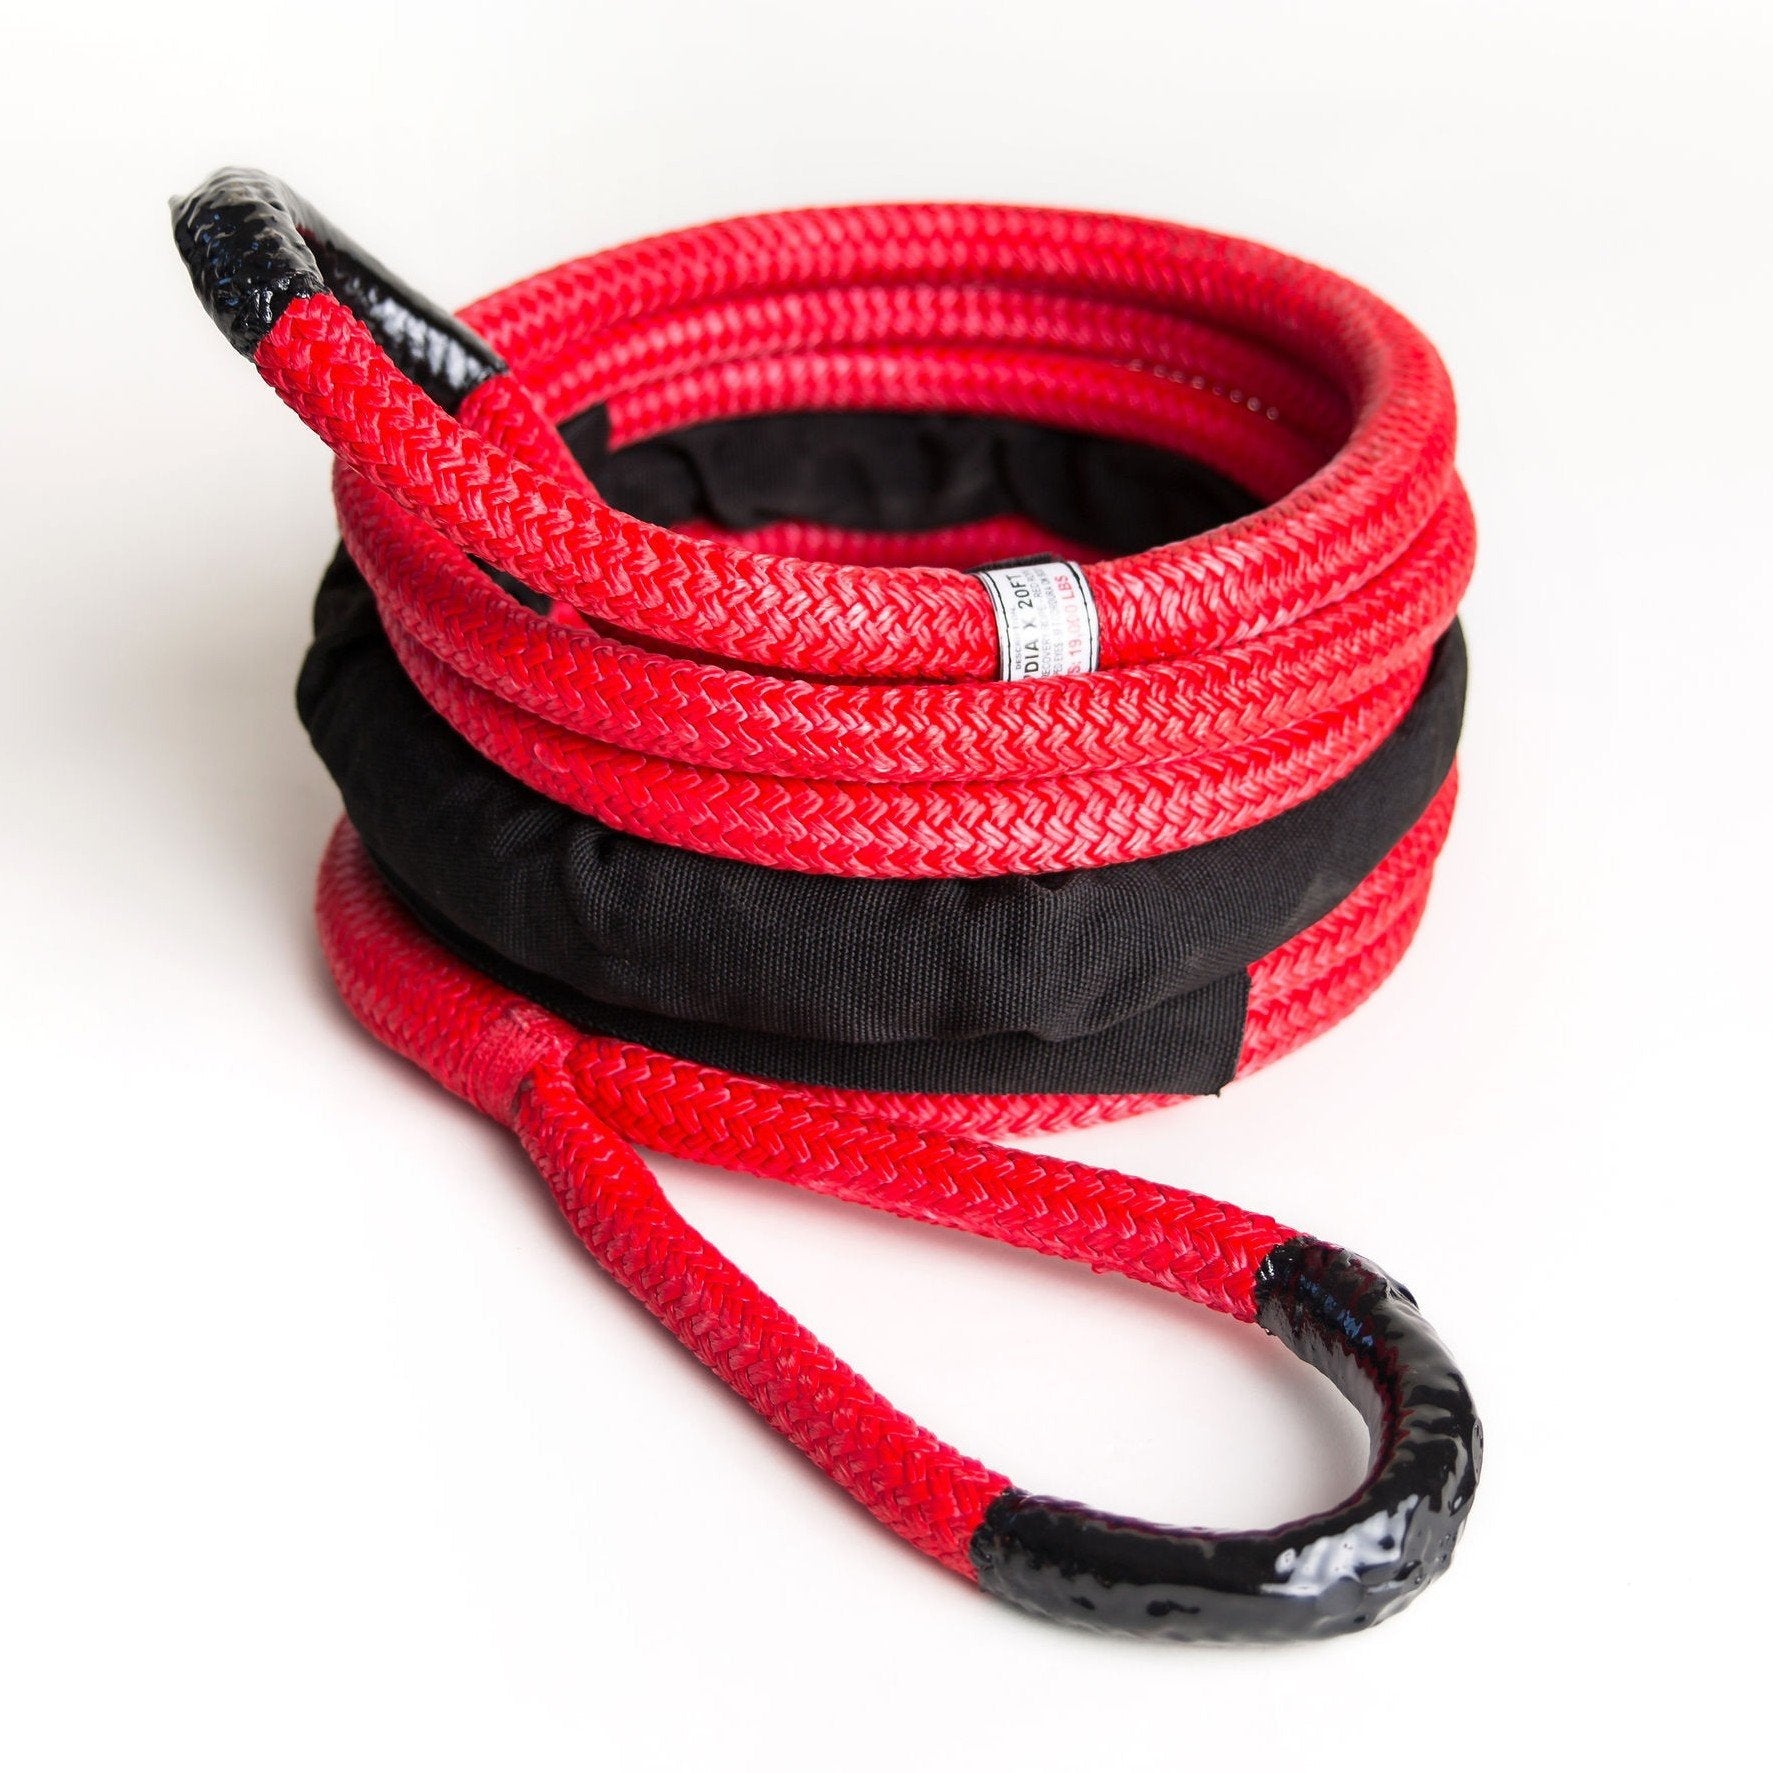 Yankum Ropes - 3/4" Kinetic Recovery Rope "Rubber Boa" [WLL 3,800-5,400 lbs]  [MBS 19,000 lbs]